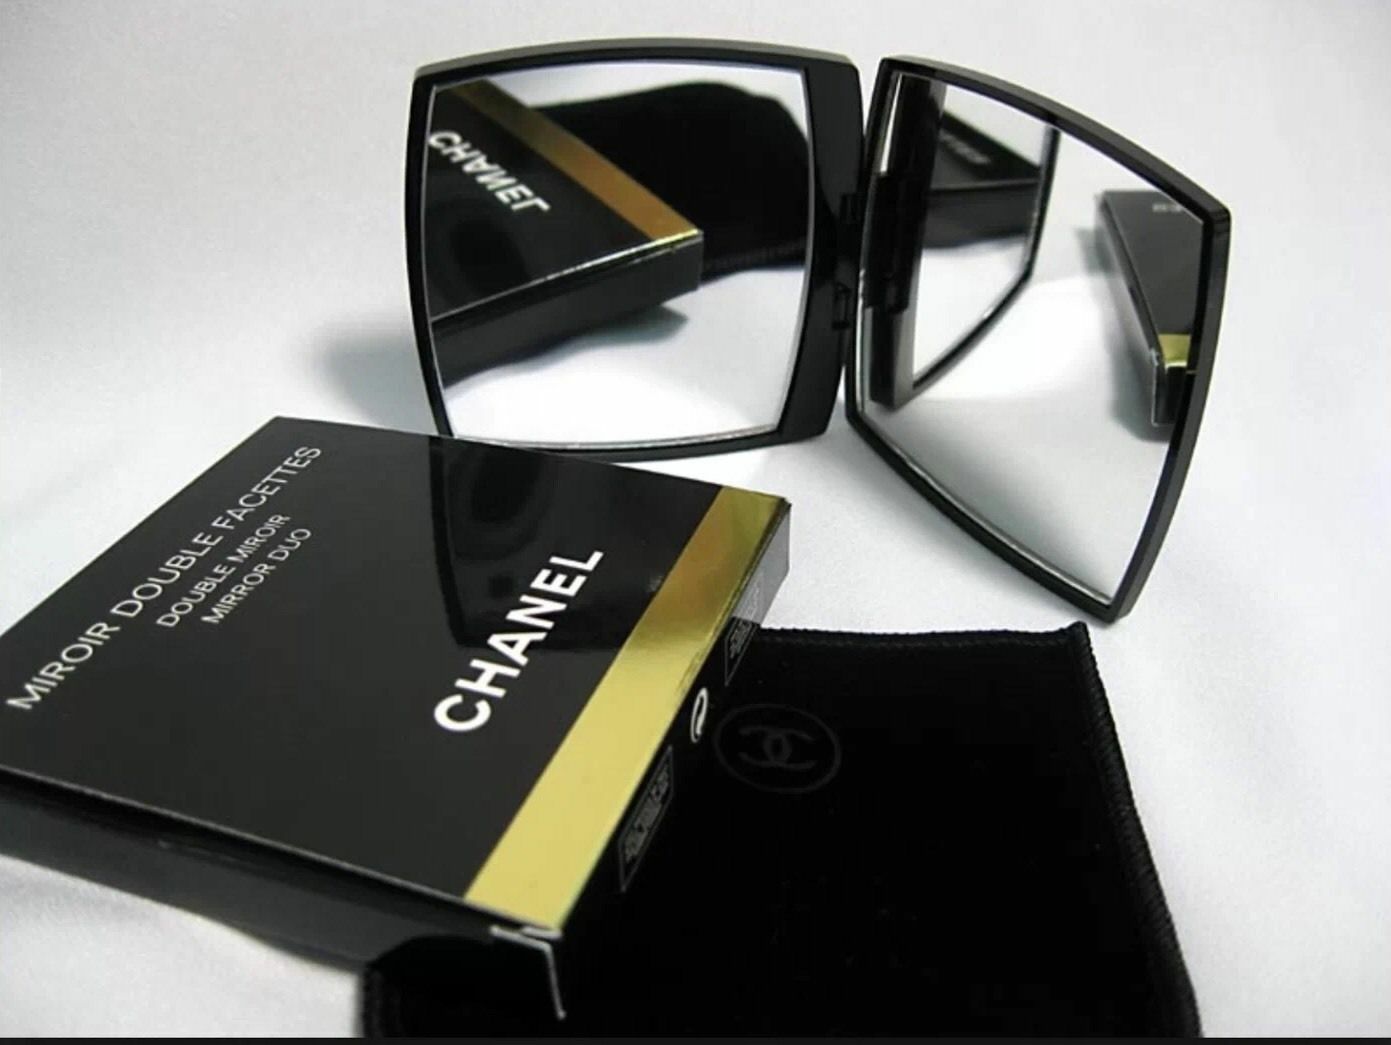 CHANEL MIROIR DOUBLE FACETTES MIRROR DUO LIMITED EDITION - OVNI NEW